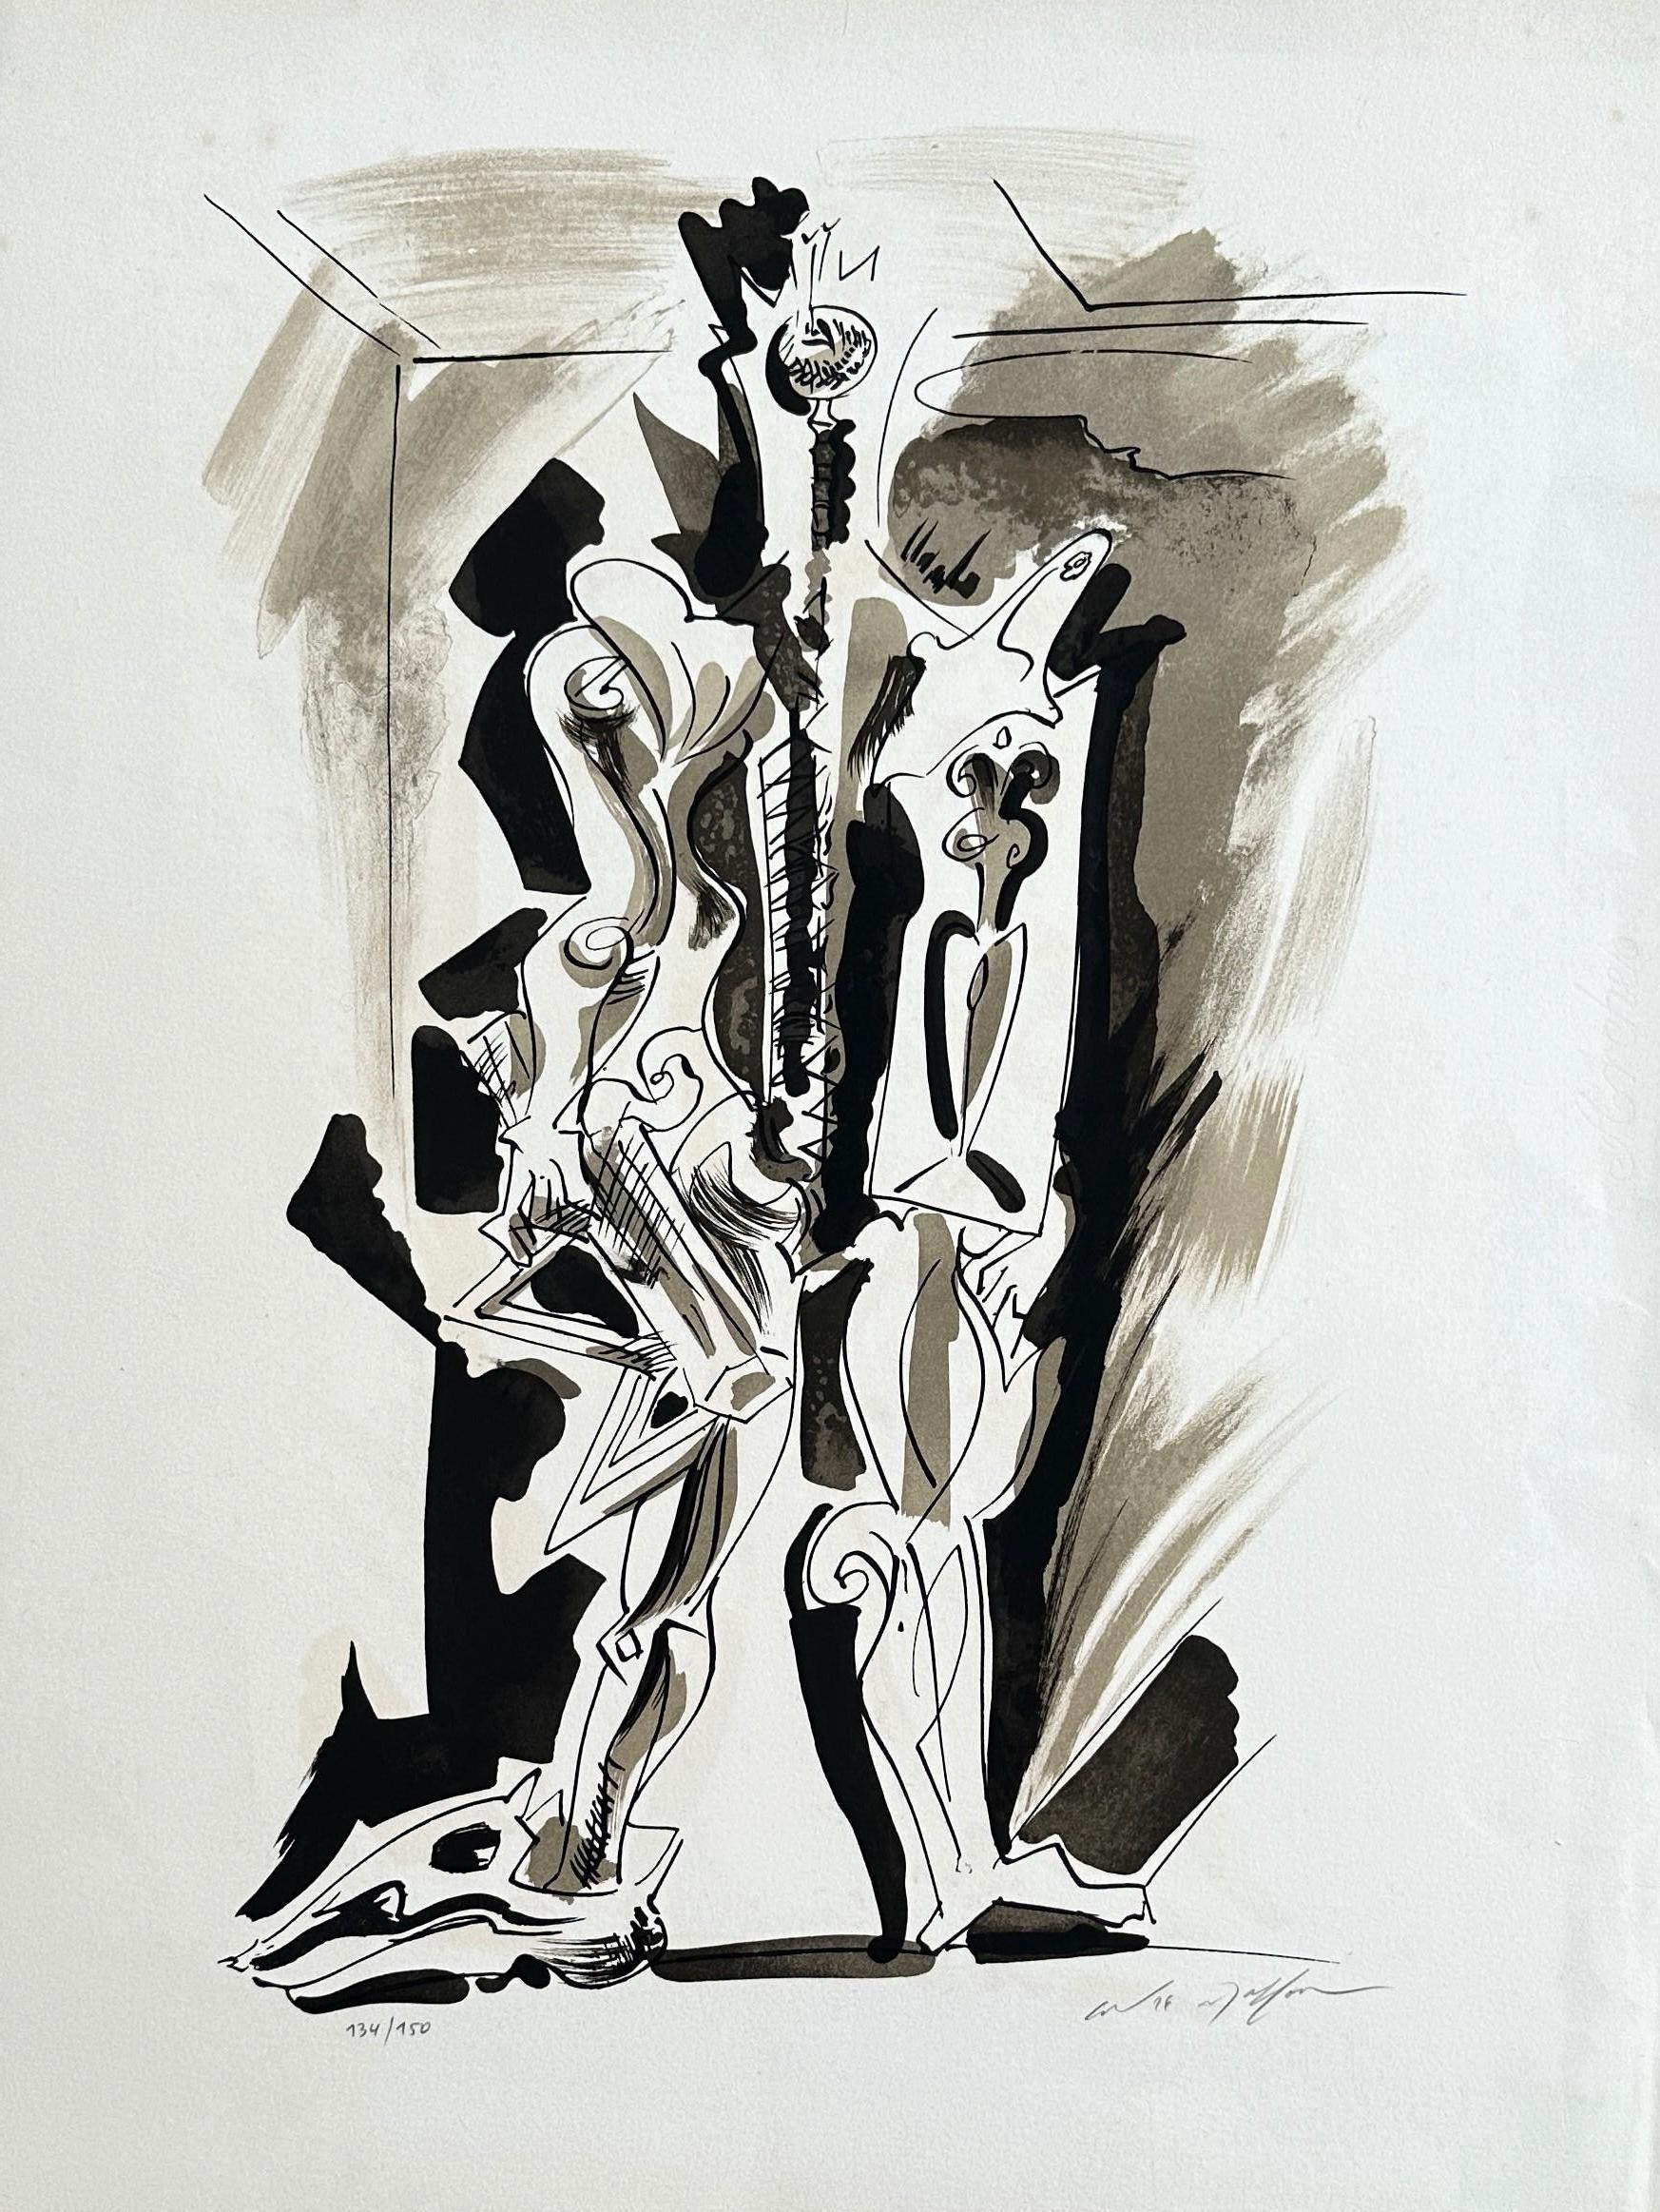 André Masson Abstract Print - Surrealist Figure - Original Lithograph Hand Signed & Numbered